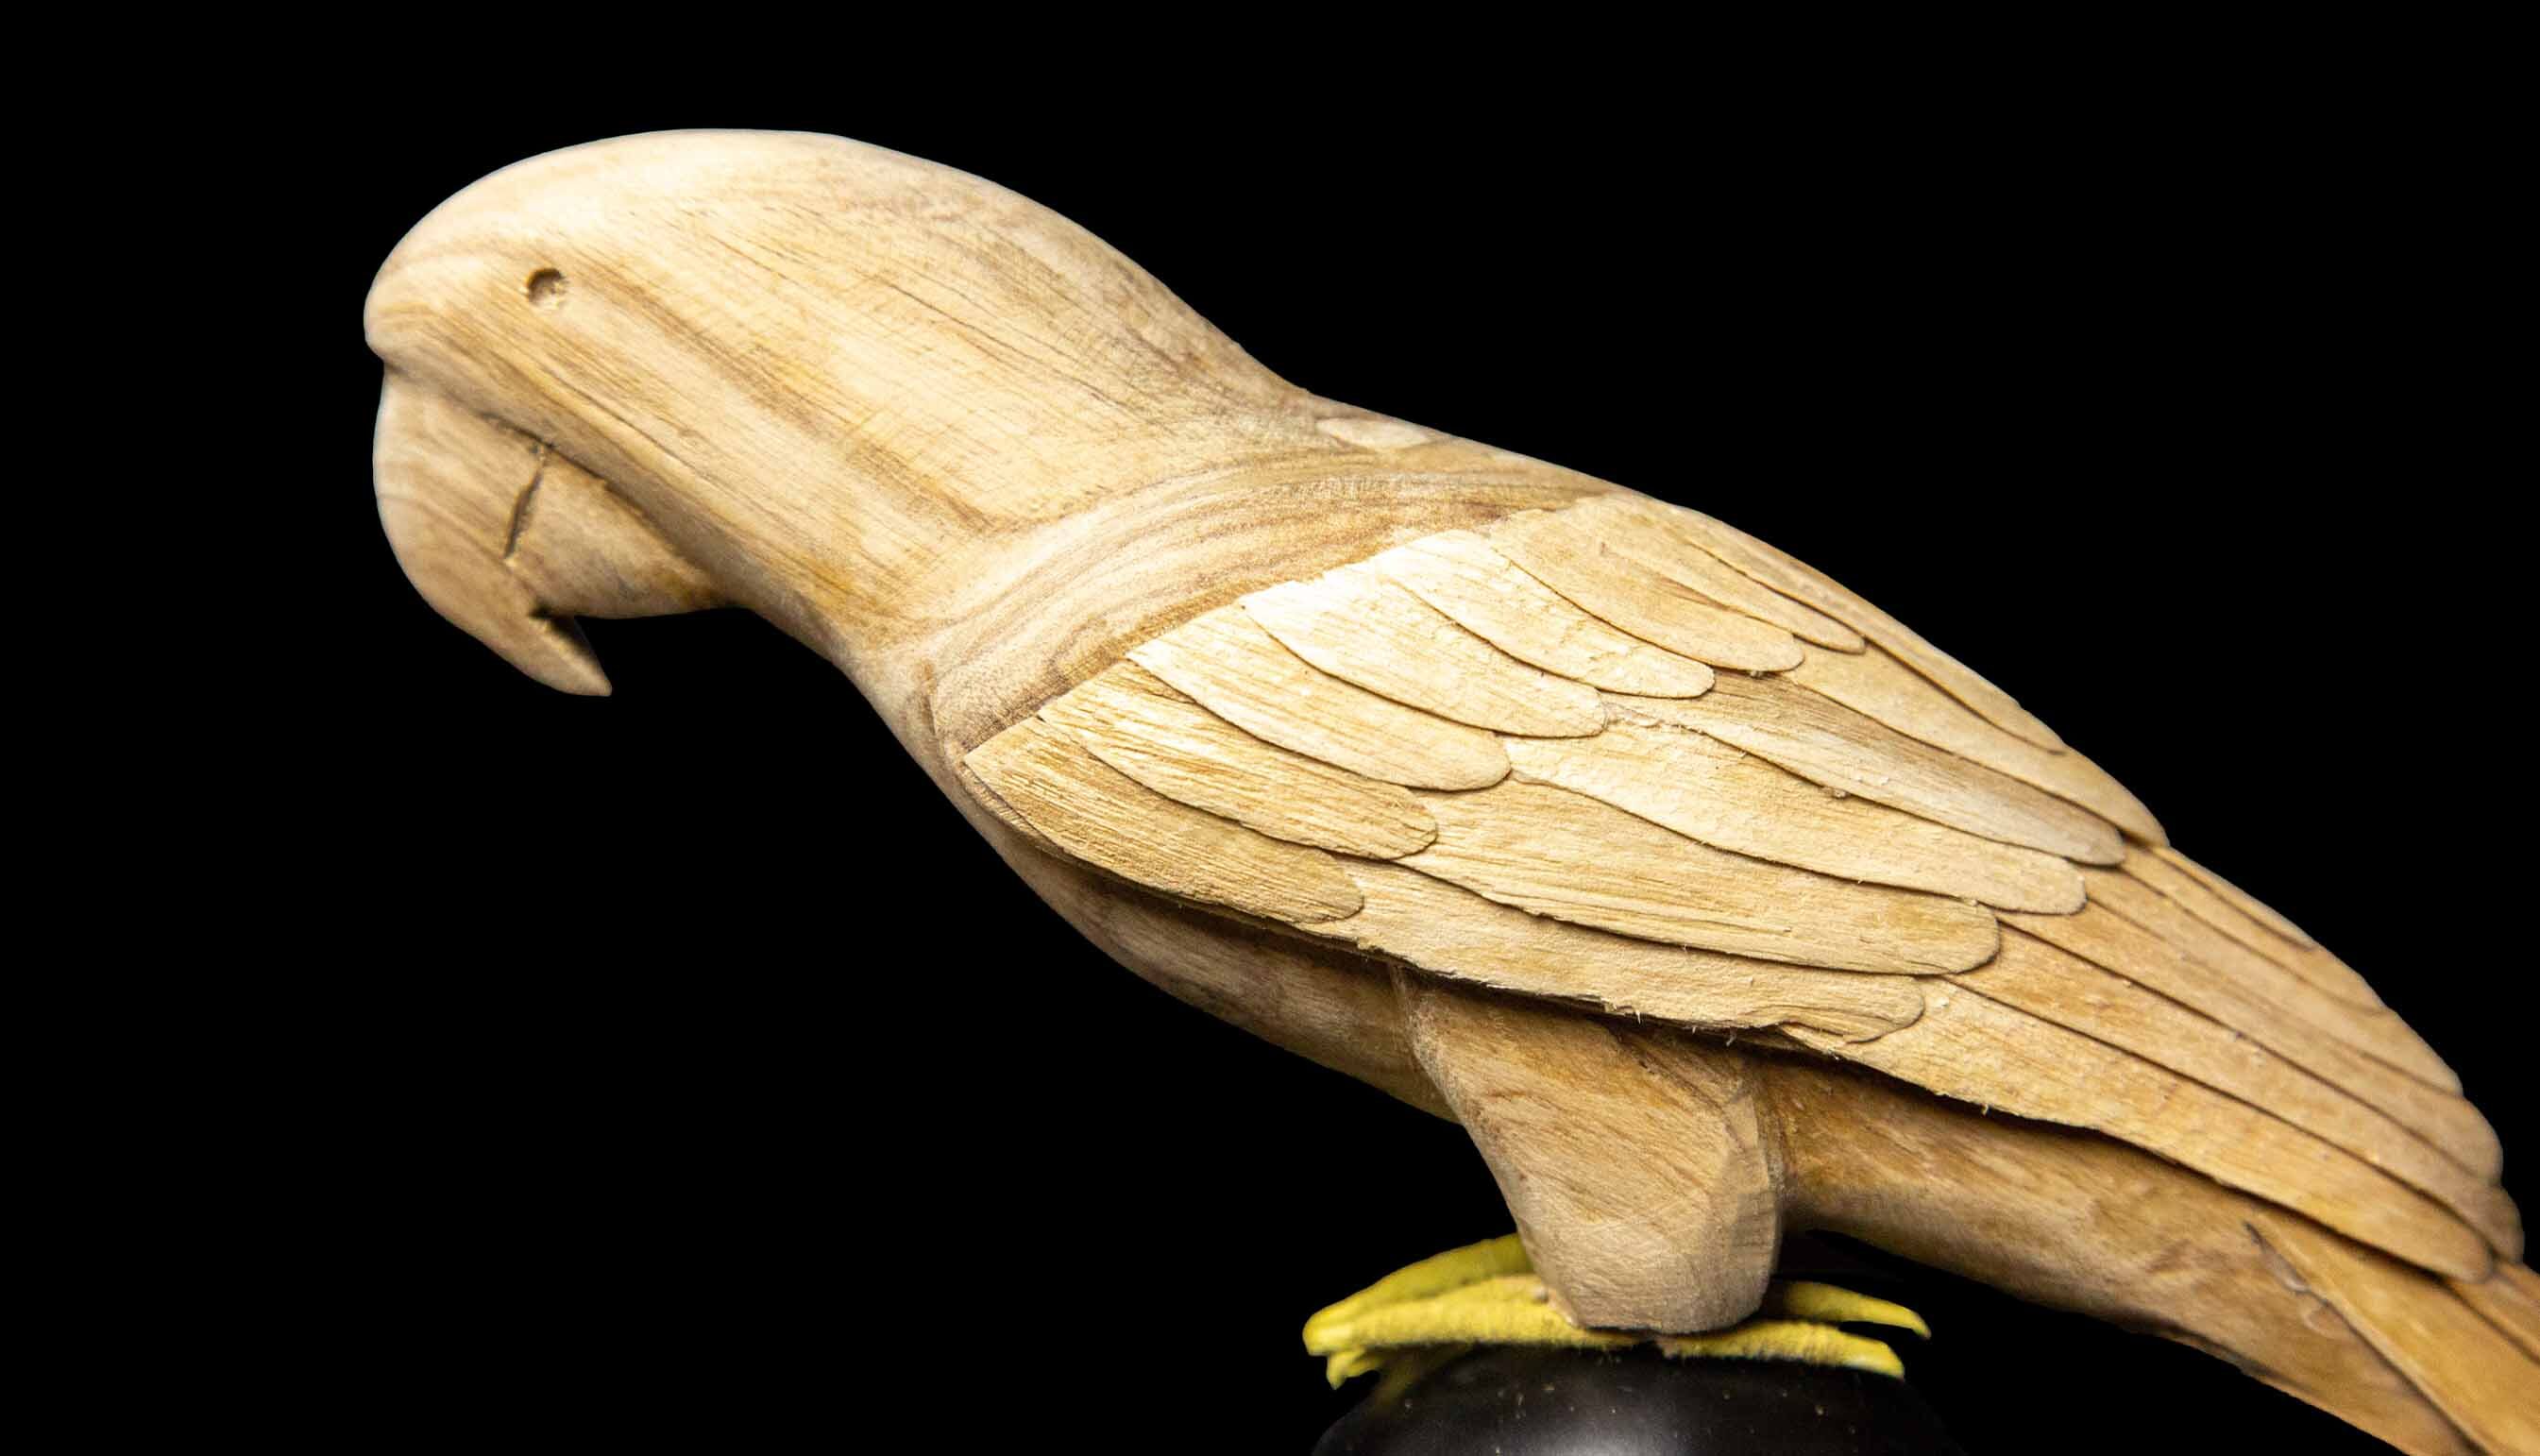 Carved Wooden Parrot on a Stand